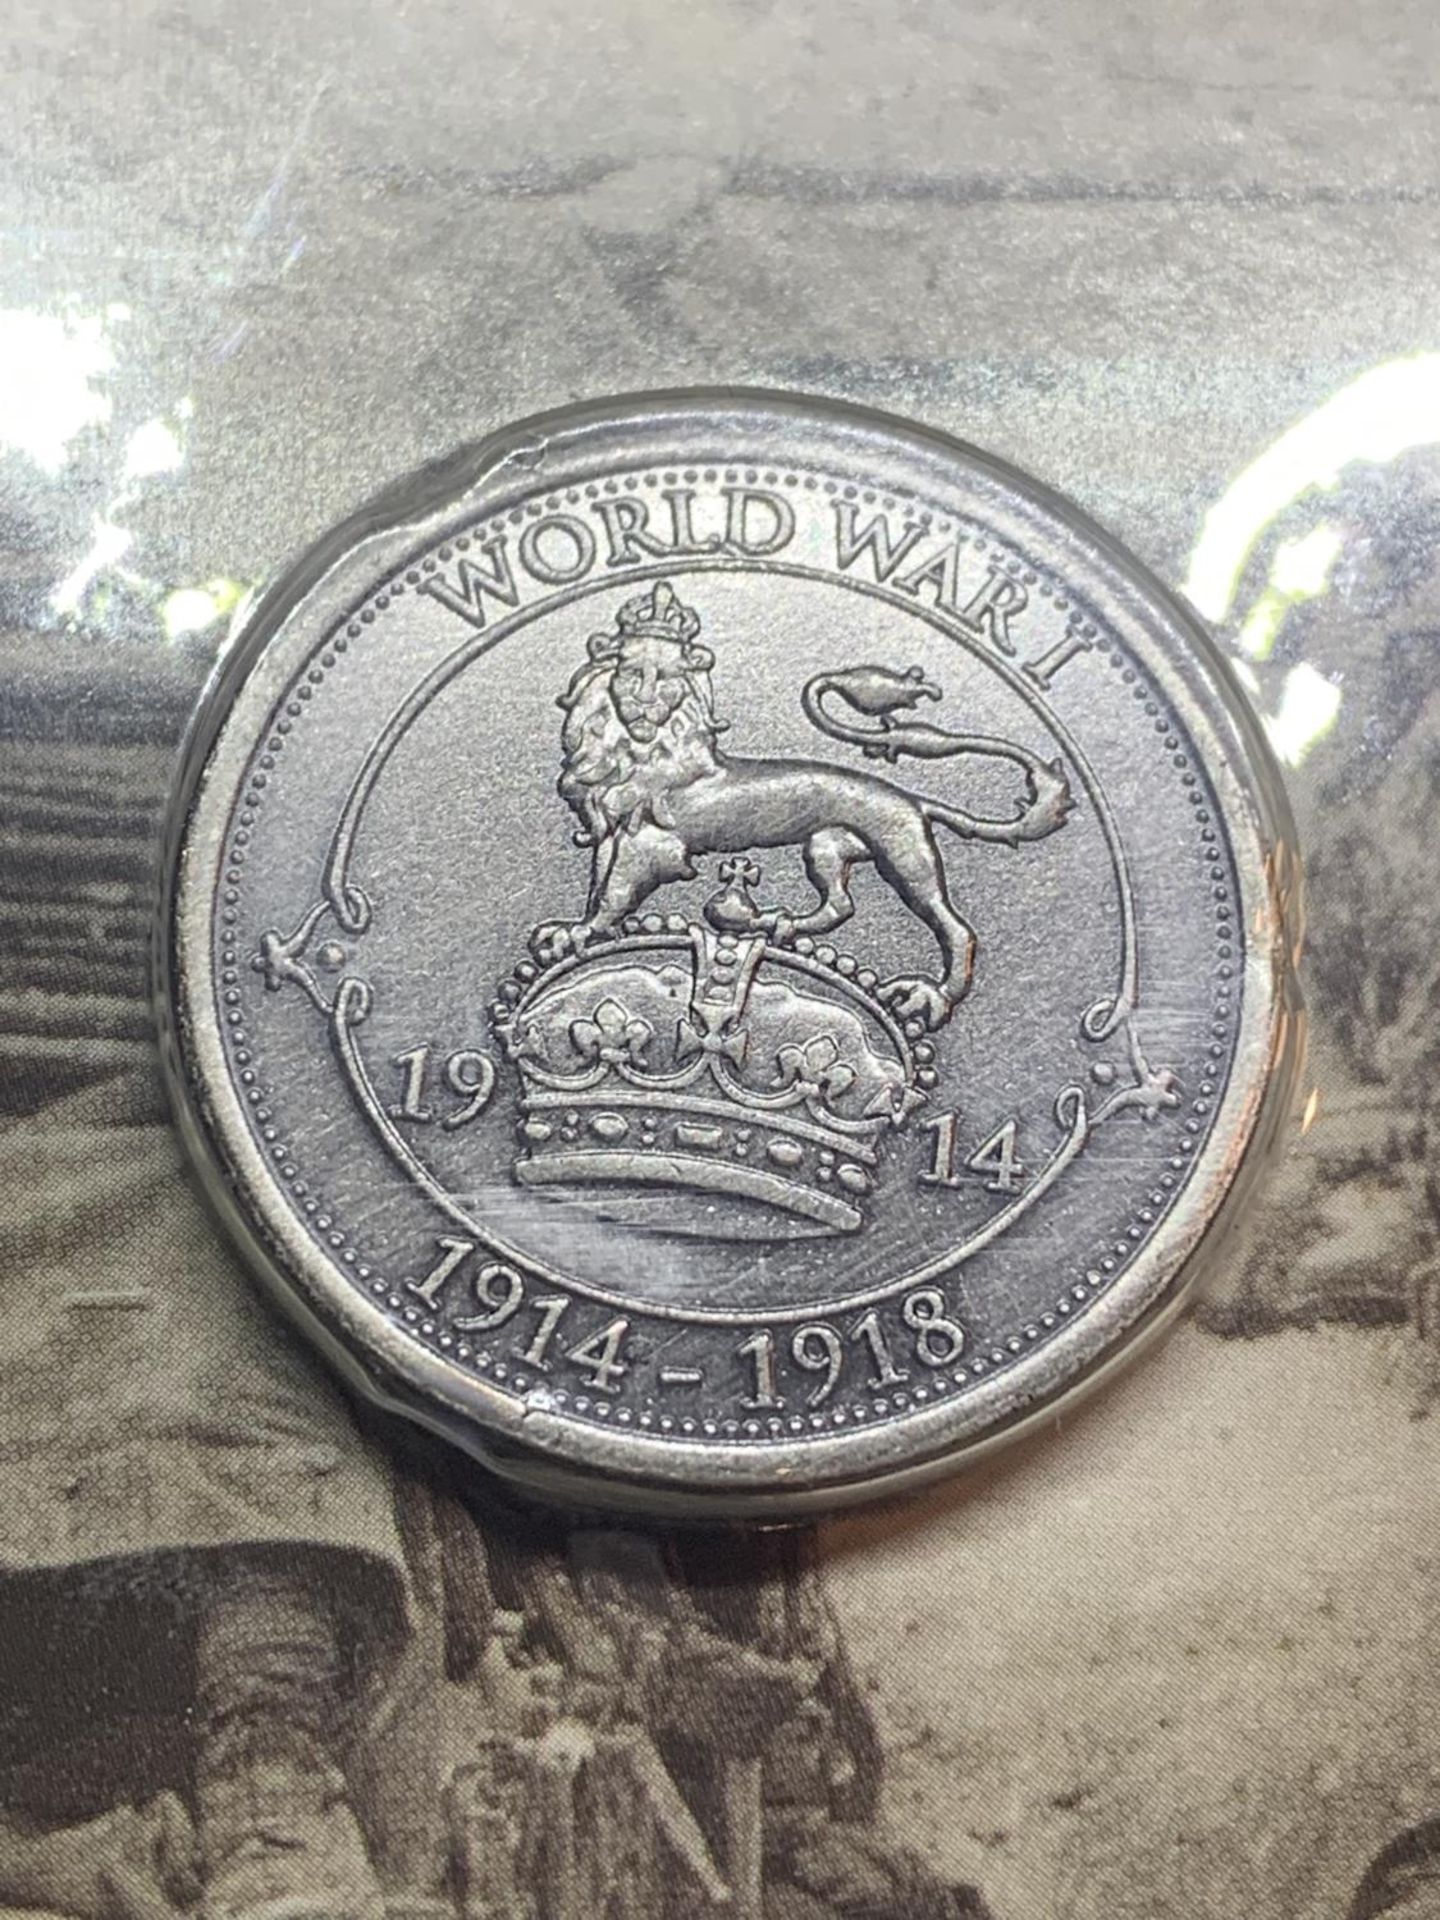 FOUR SILVER PROOF FIRST WORLD WAR COMMEMORATIVE KING'S SHILLINGS - Image 2 of 4